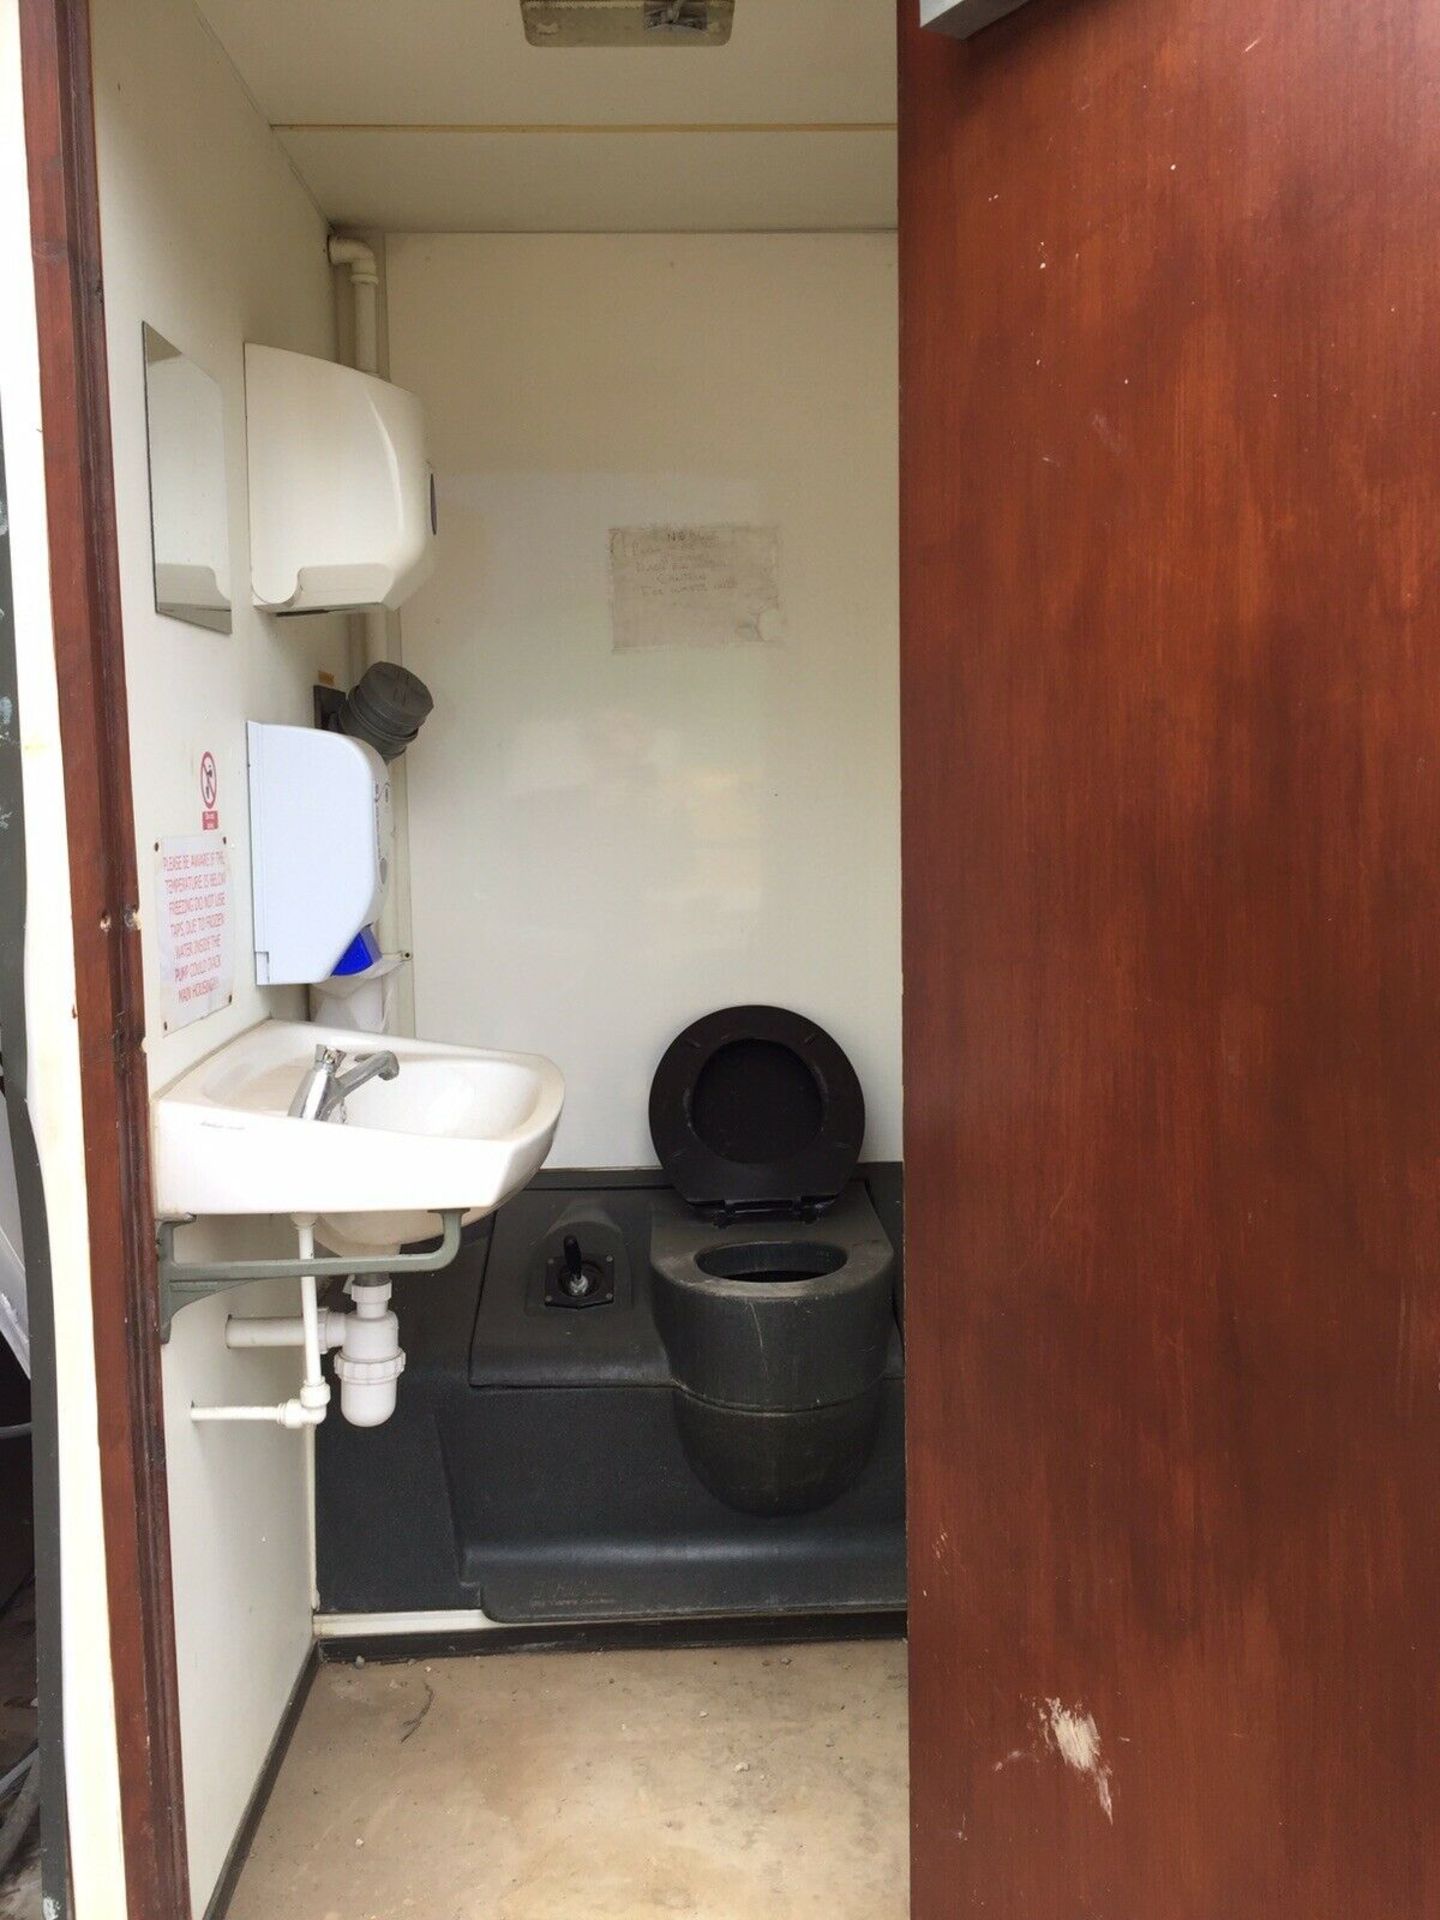 Site Cabin Office Welfare Unit Canteen Drying Room 24ft Anti Vandal Steel - Image 3 of 12